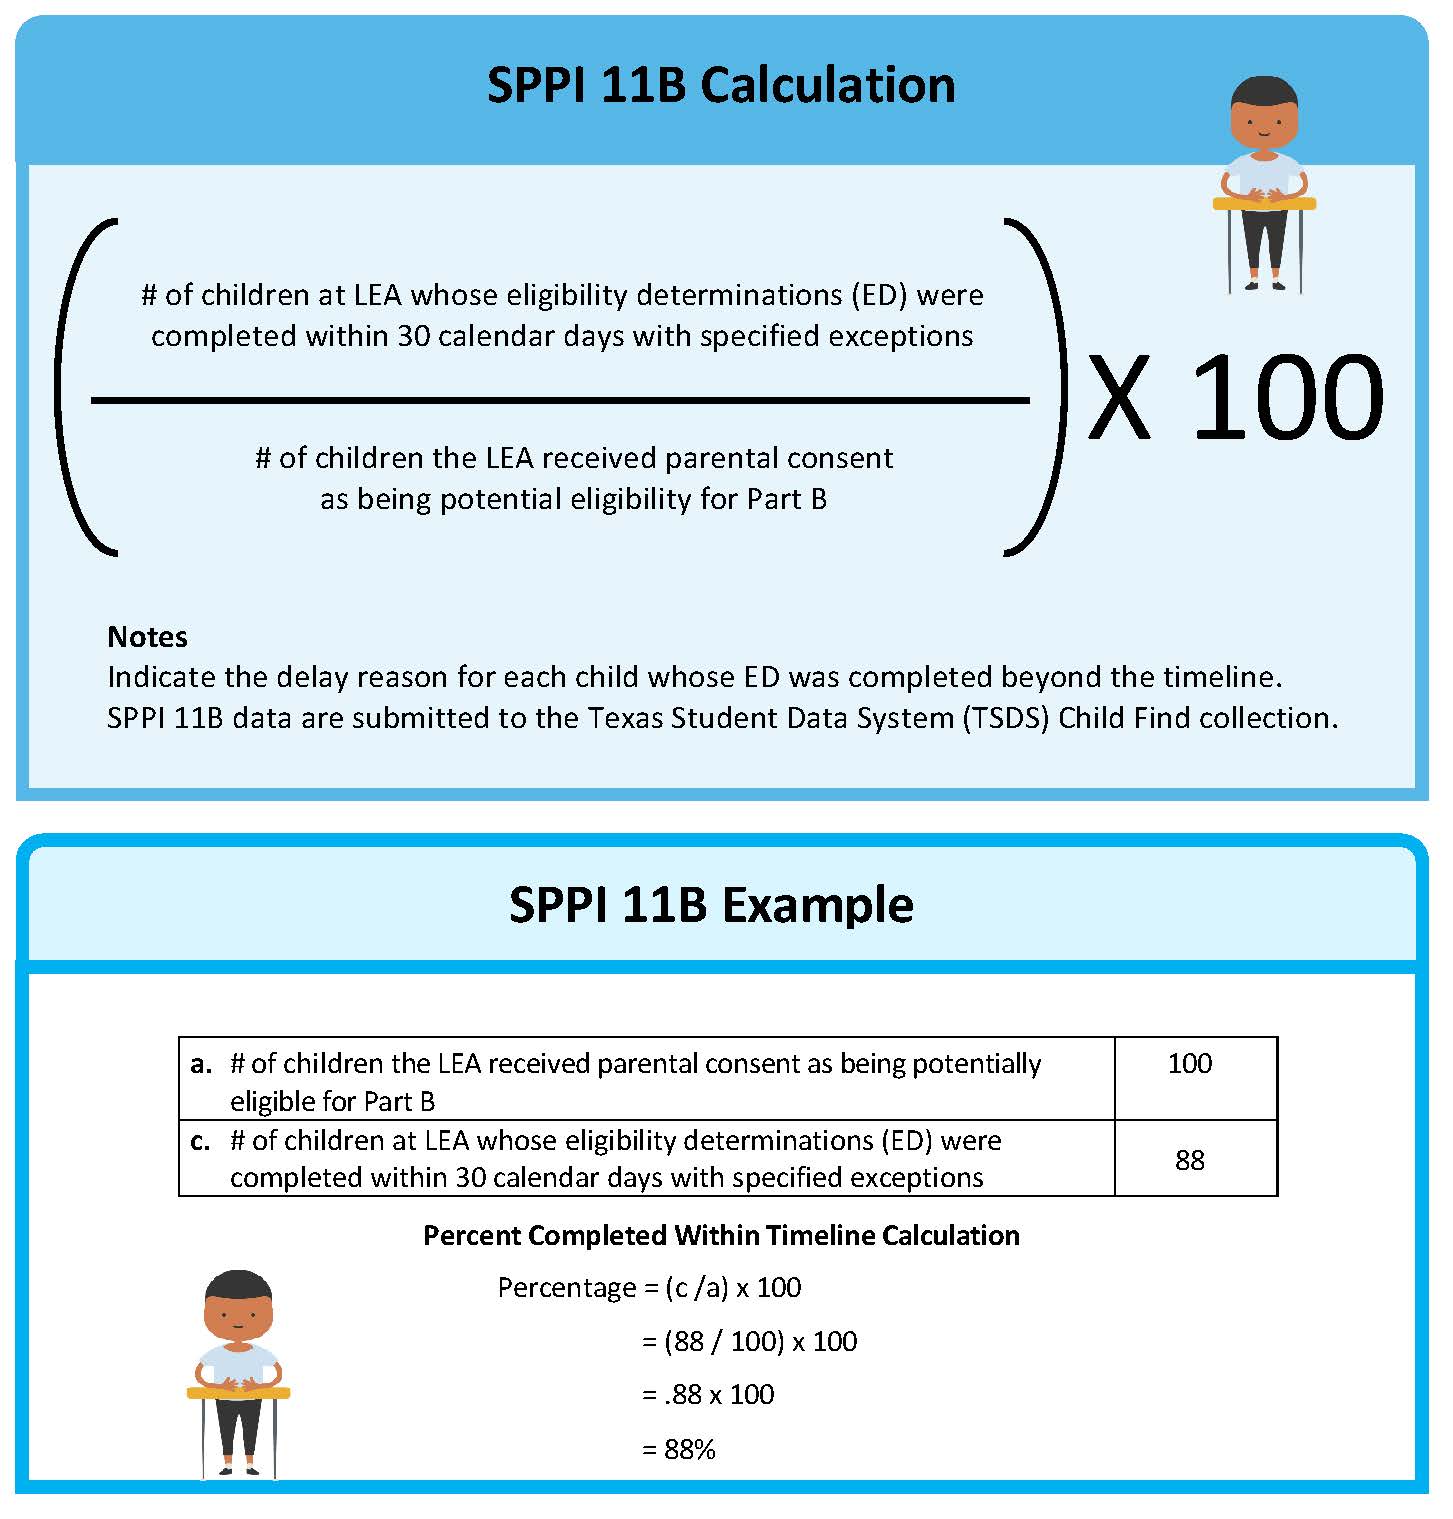 sppi-11b-calculation-and-example.jpg